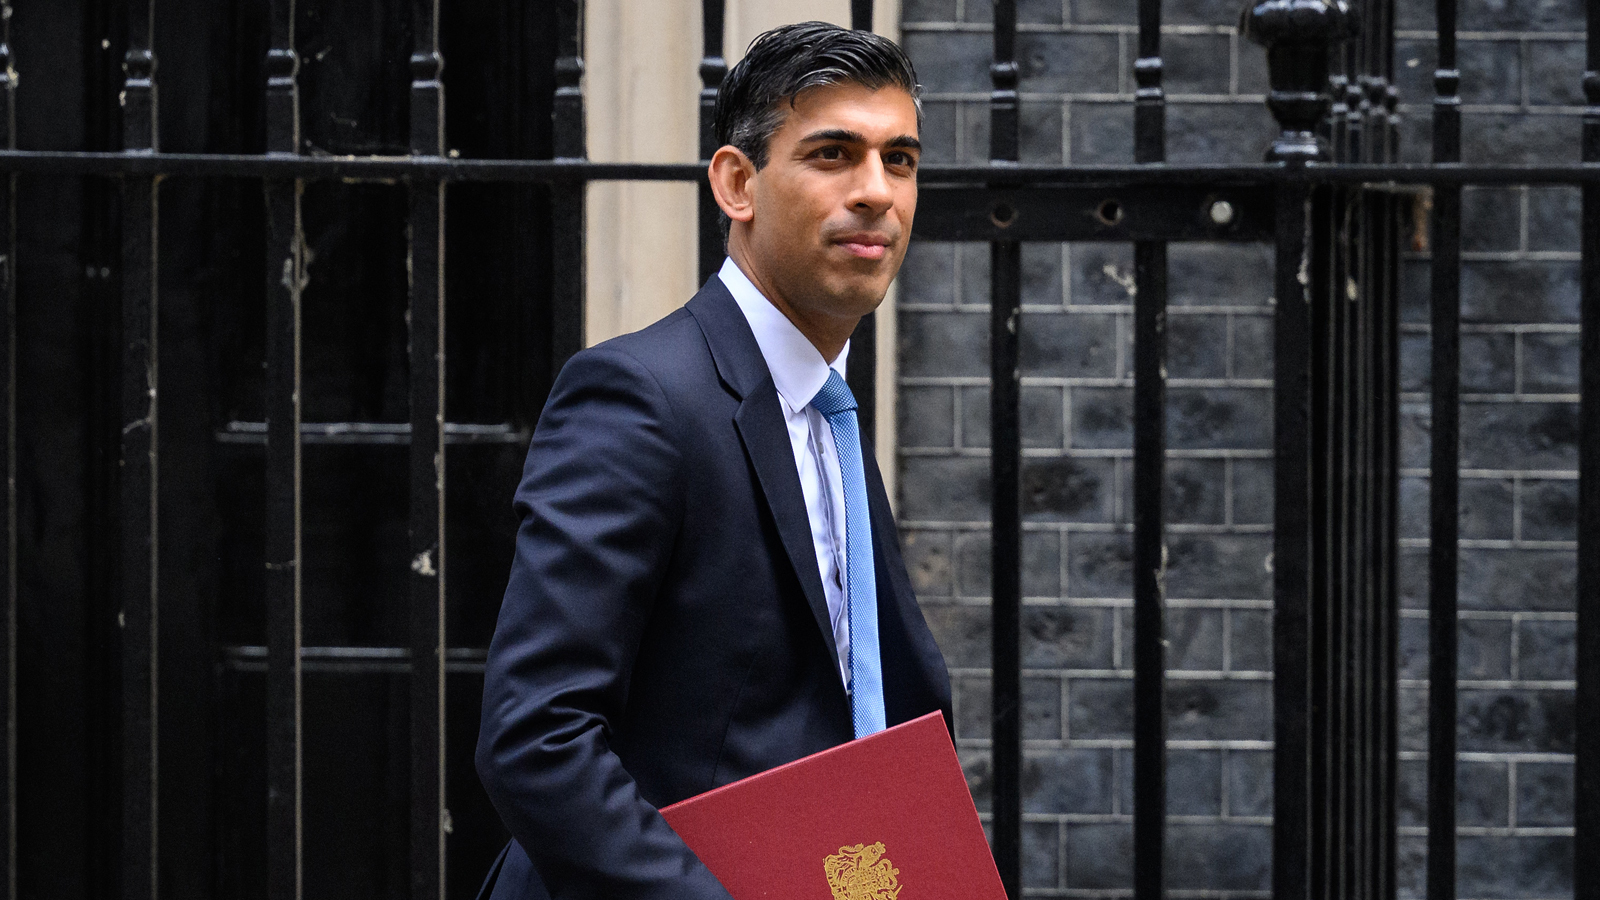 new UK prime minister rishi sunak walkins in front of a fence holding documents and wearing a suit